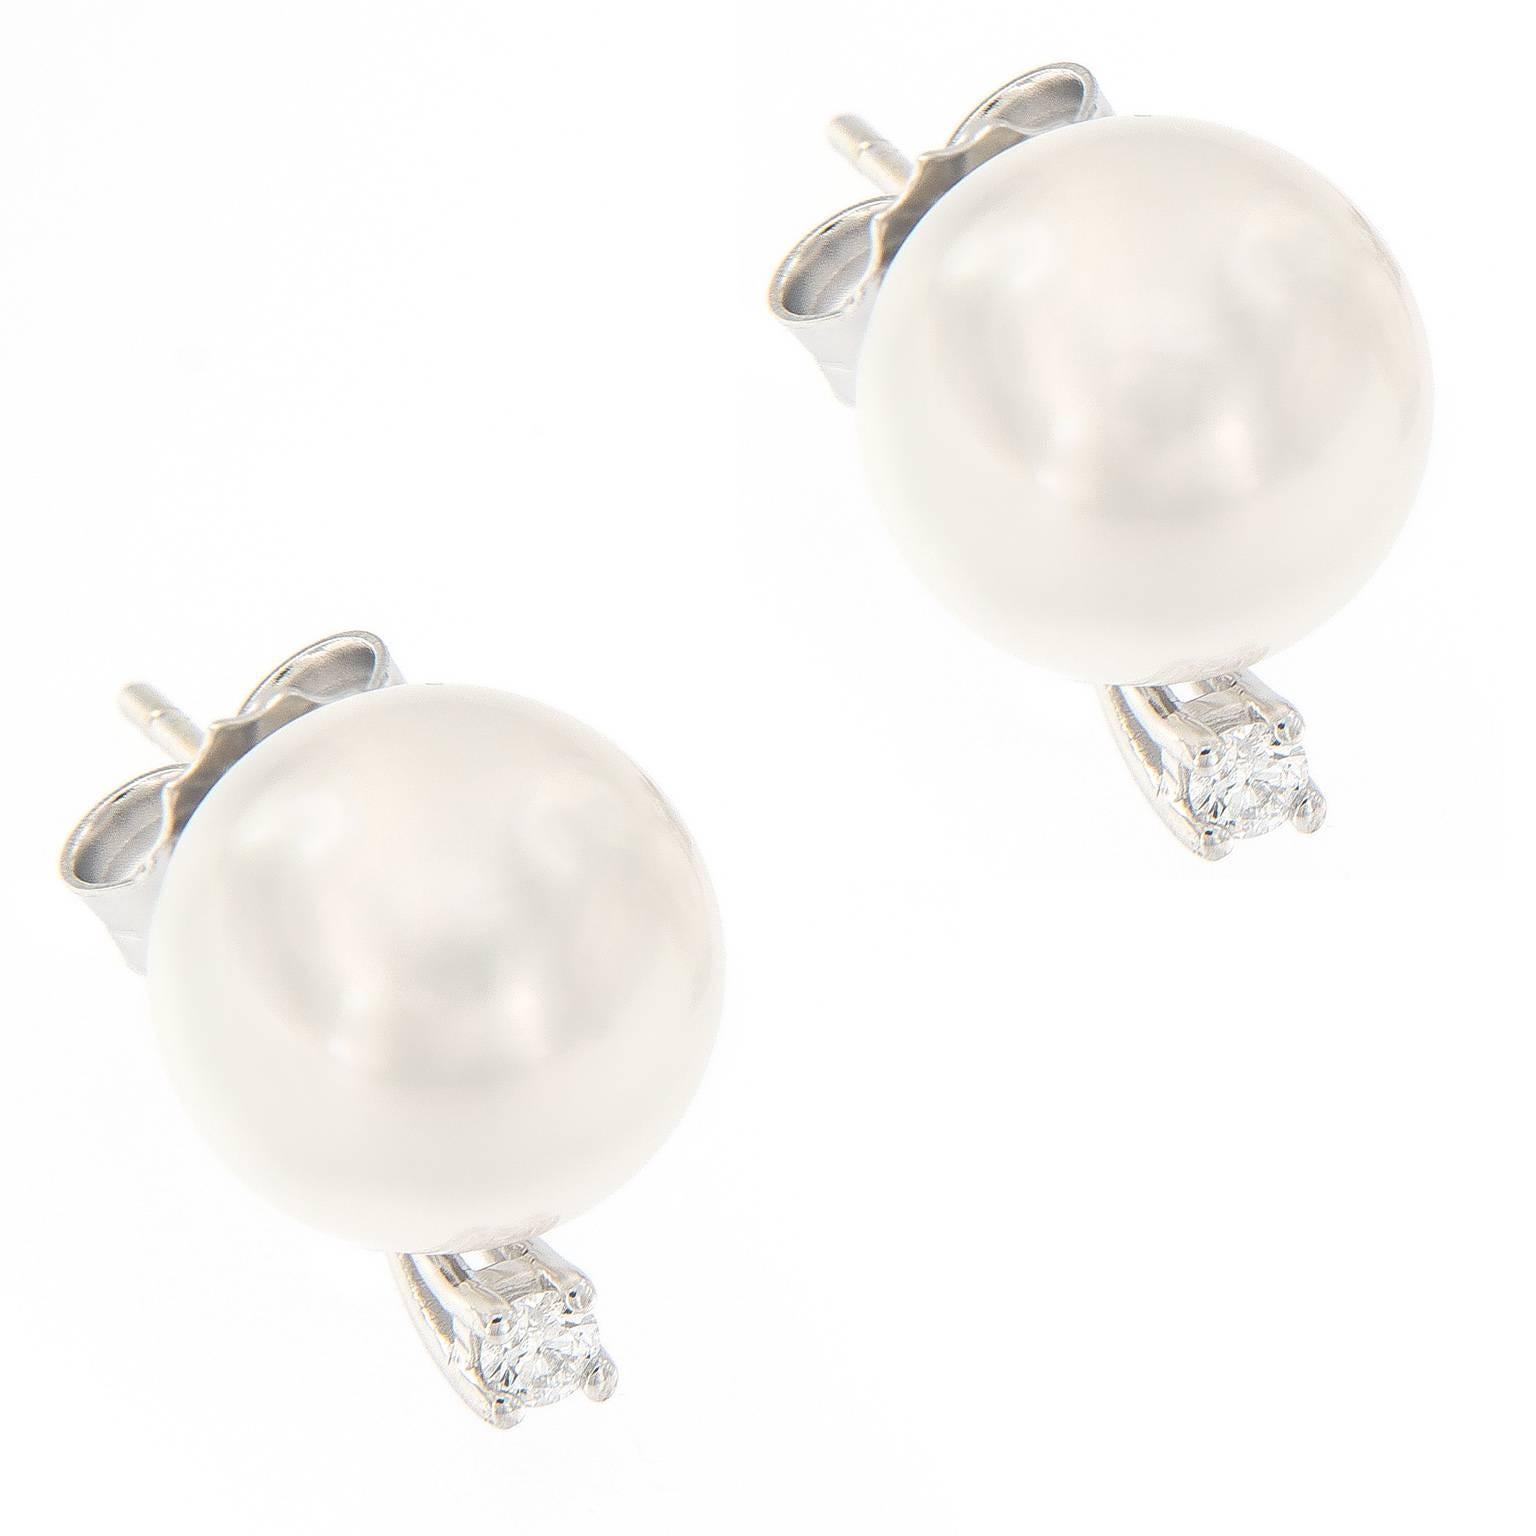 A fashion classic. A pair of approximately 10mm cultured South Sea pearls accented with a prong set diamond in 18k white gold.

Diamonds 0.10 cttw